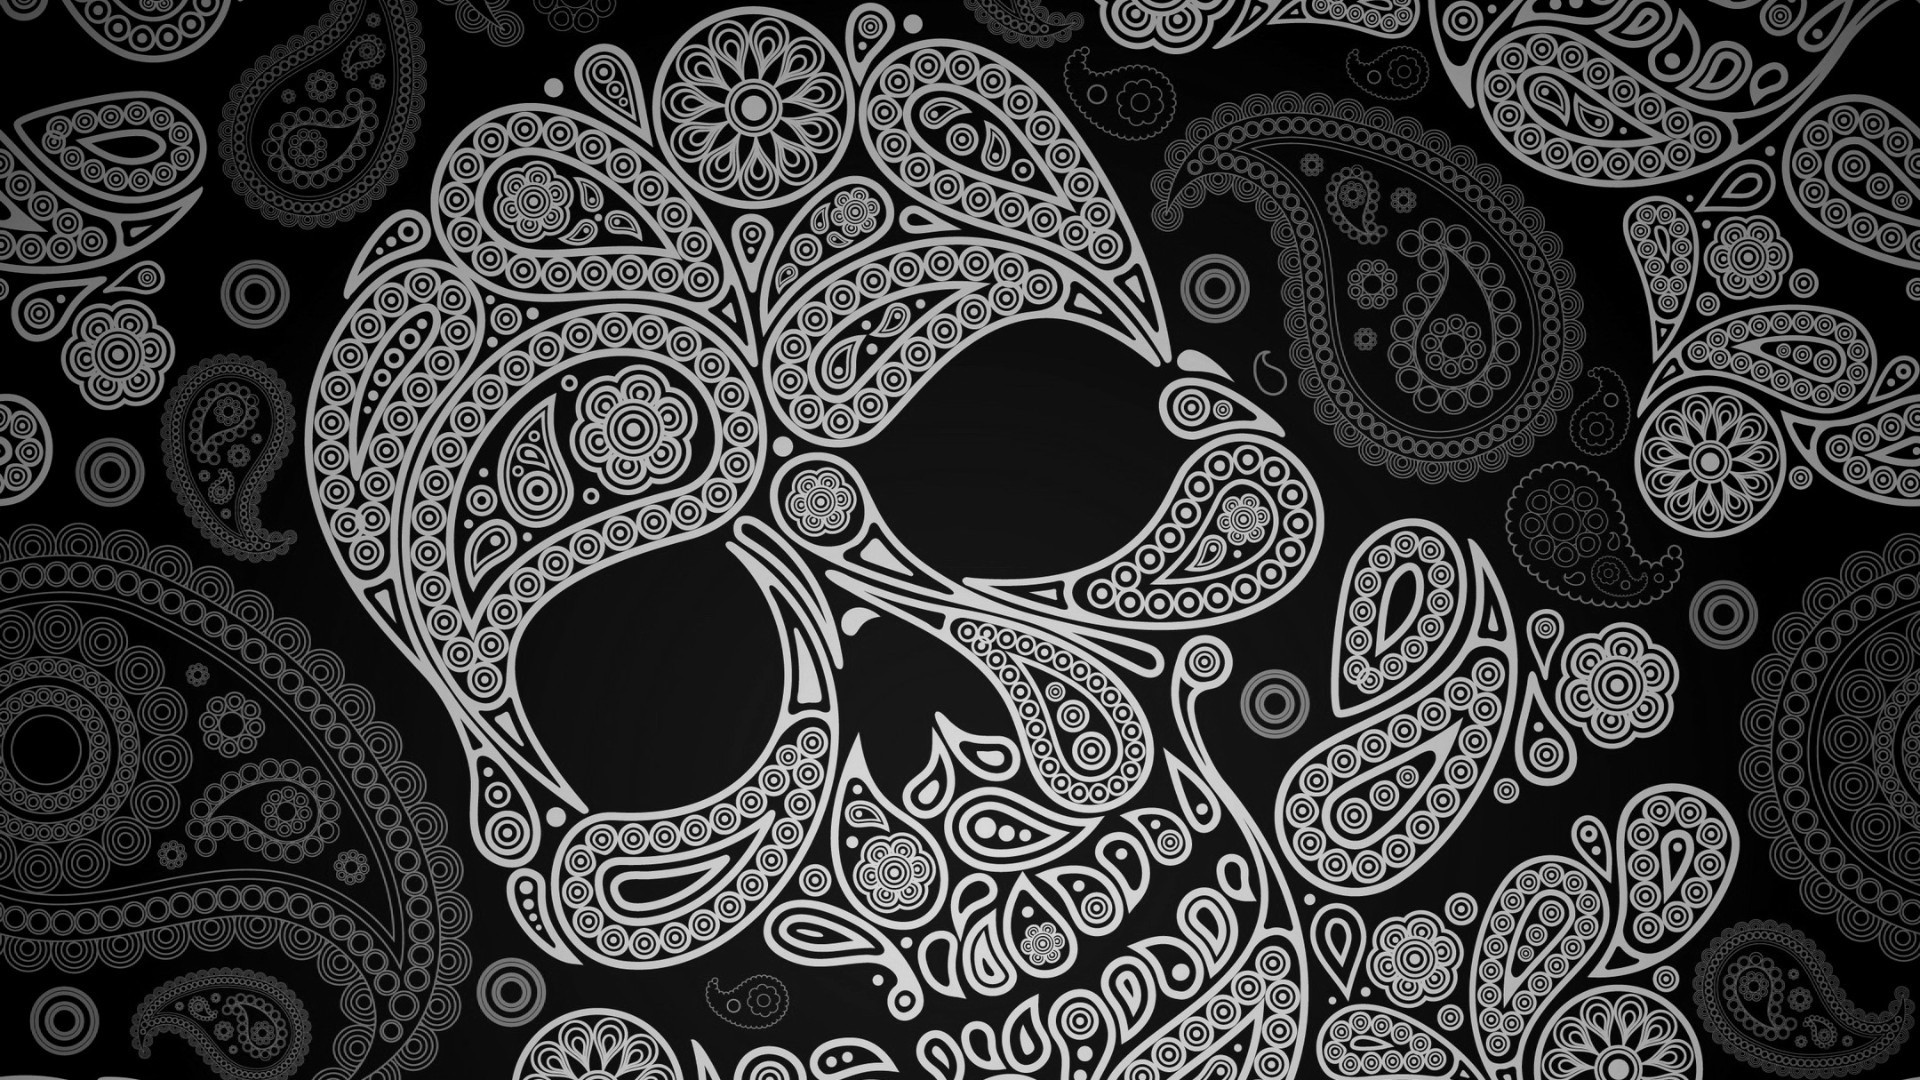 1920x1080 Mexican Day of the Dead Sugar Skull Wallpaper Anatomy Boutique